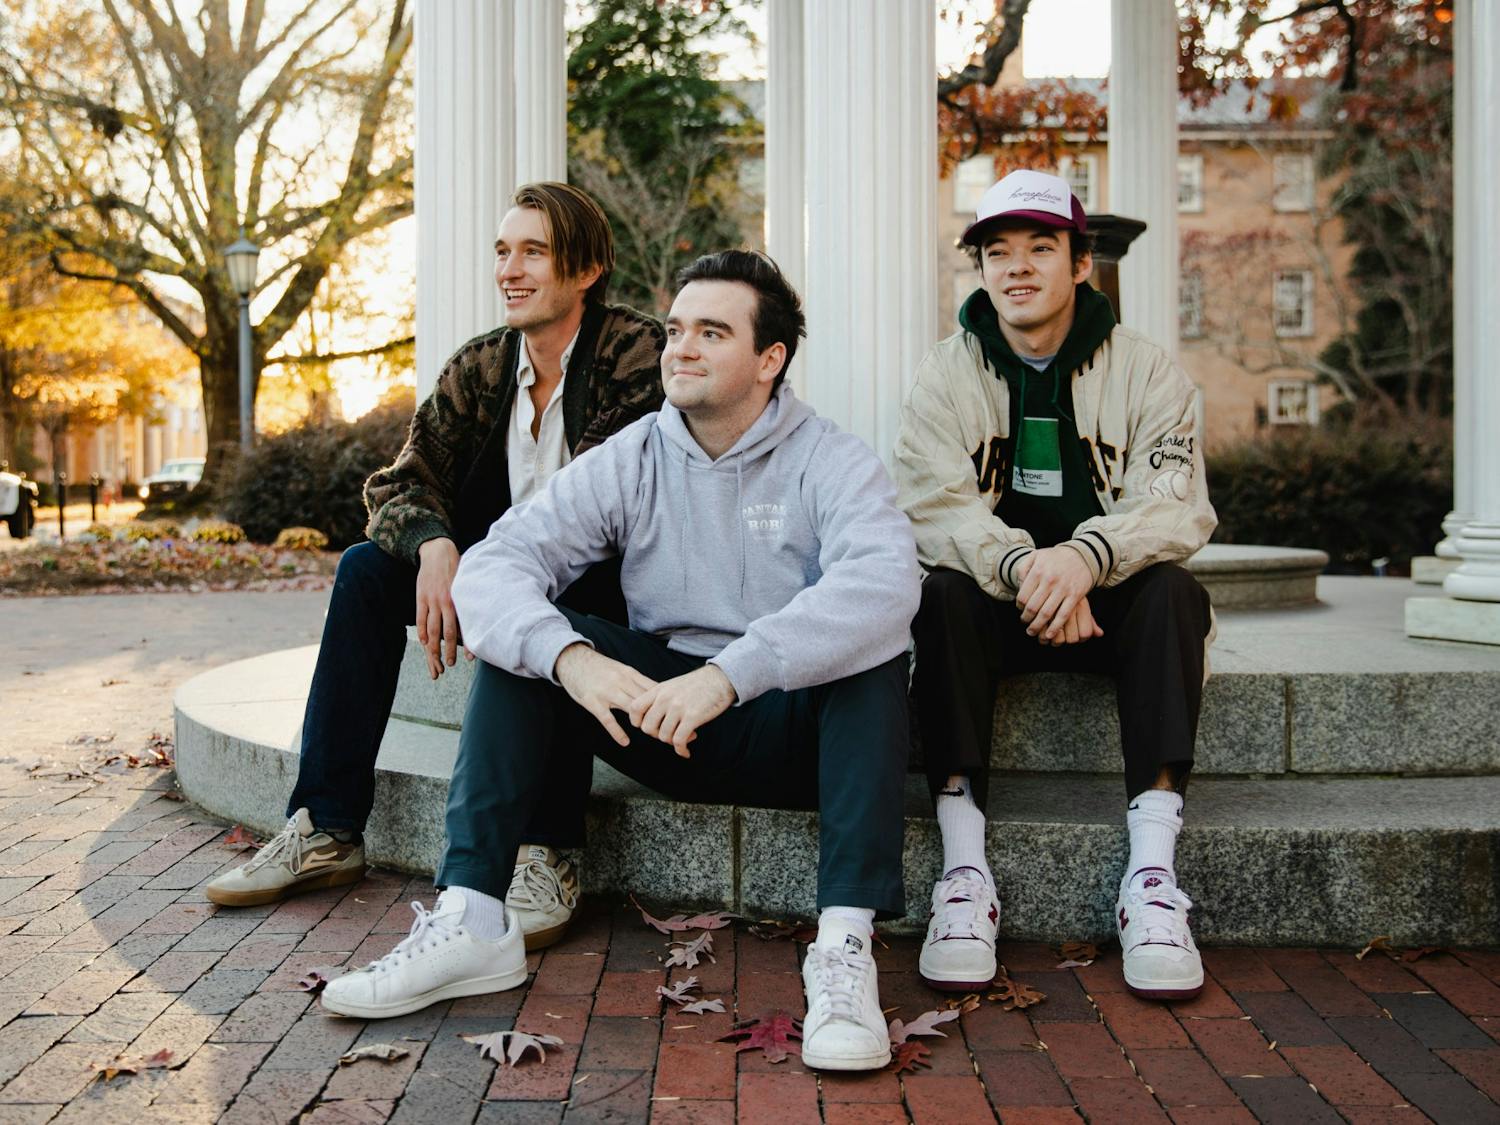 Dylan Melisaratos (middle), a senior Business Administration major, poses for a portrait with his friends James Toole and Matthew Sullivan at the Old Well on Monday, Nov. 29, 2021.